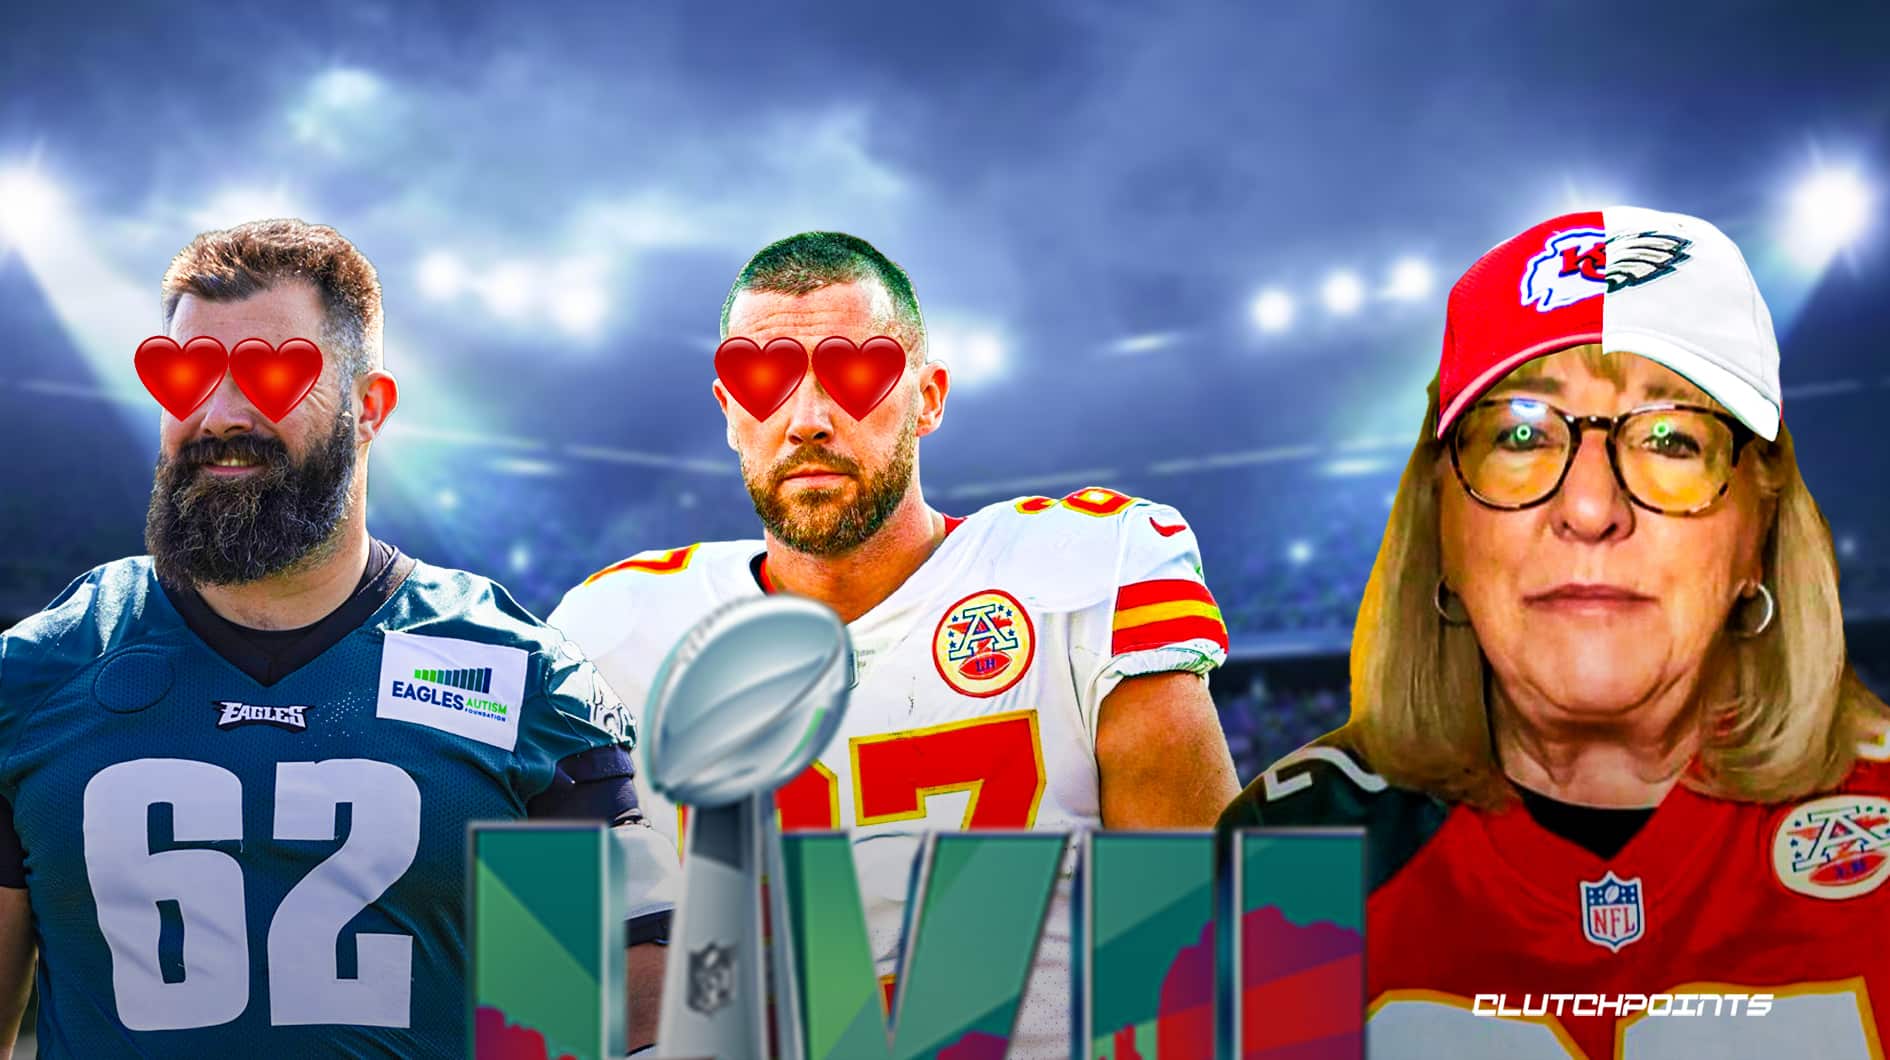 Donna Kelce, Super Bowl Mom, Tells Us the Story Behind Her Half